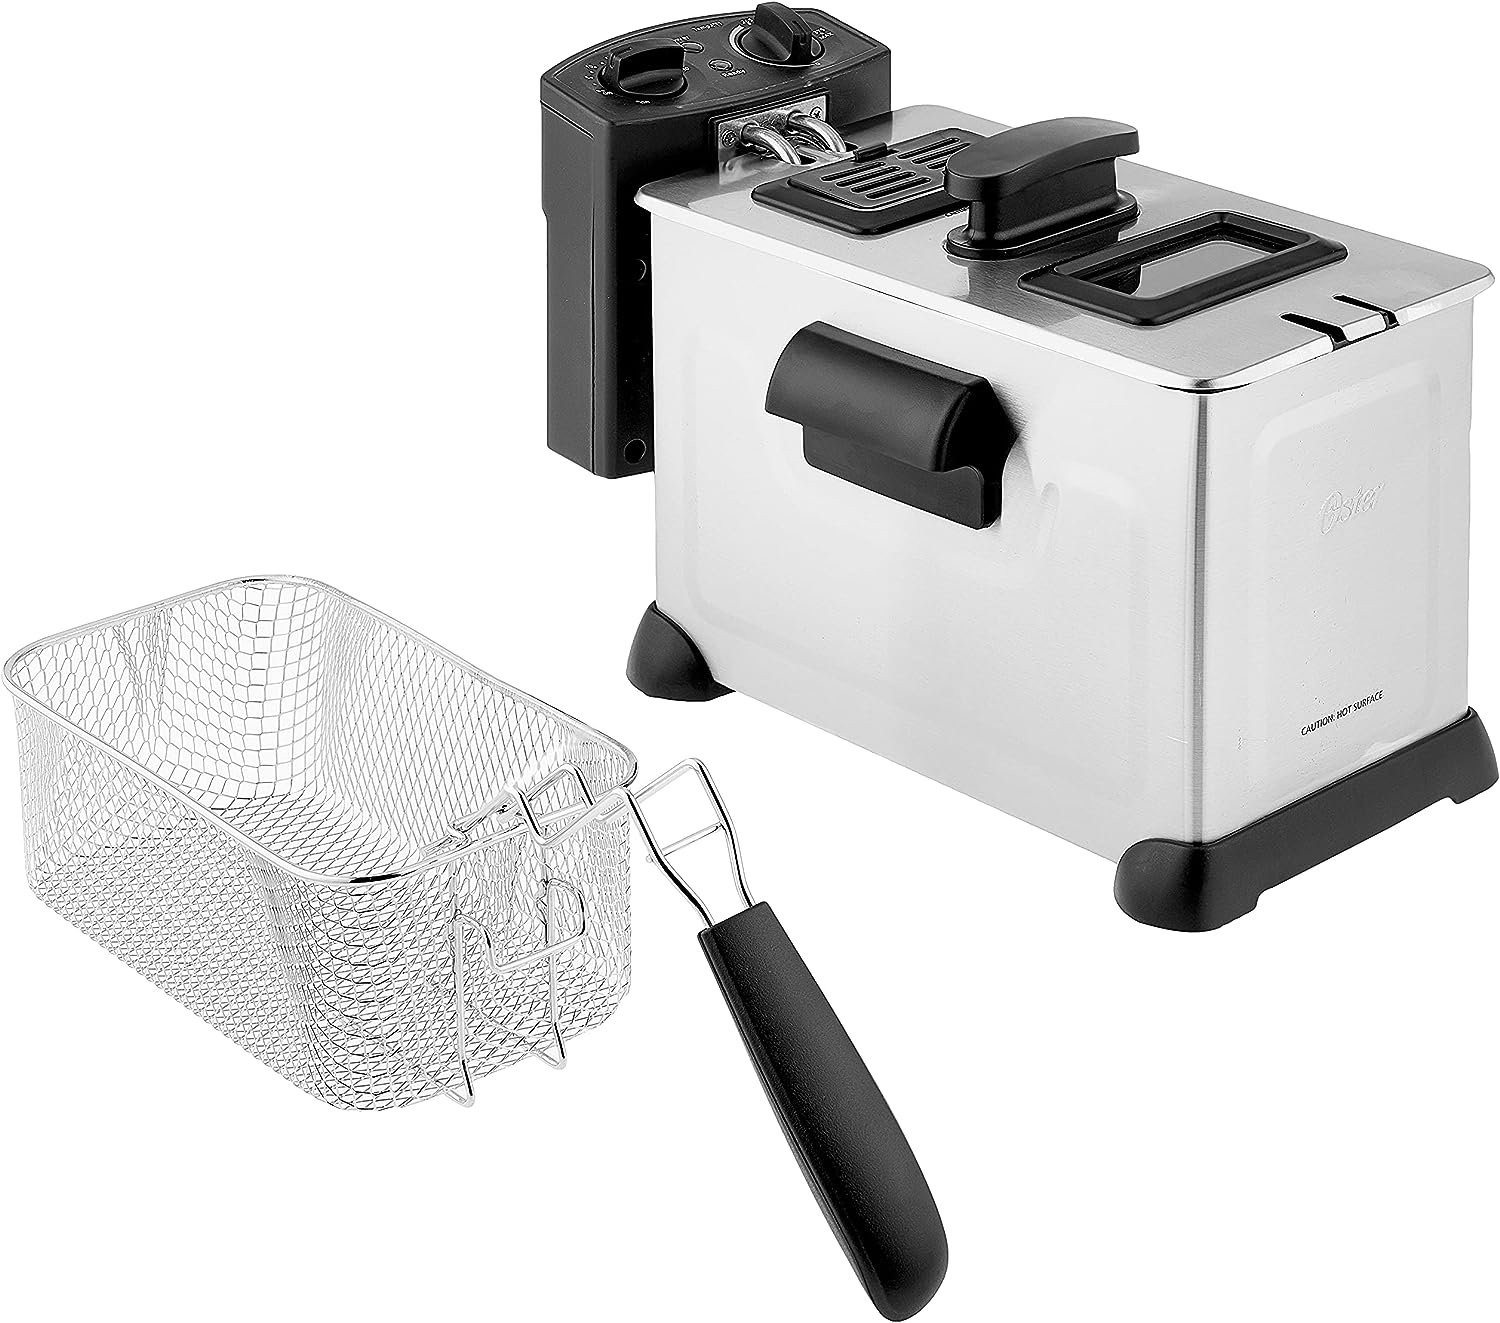 Oster Professional Style Stainless Steel Deep Fryer